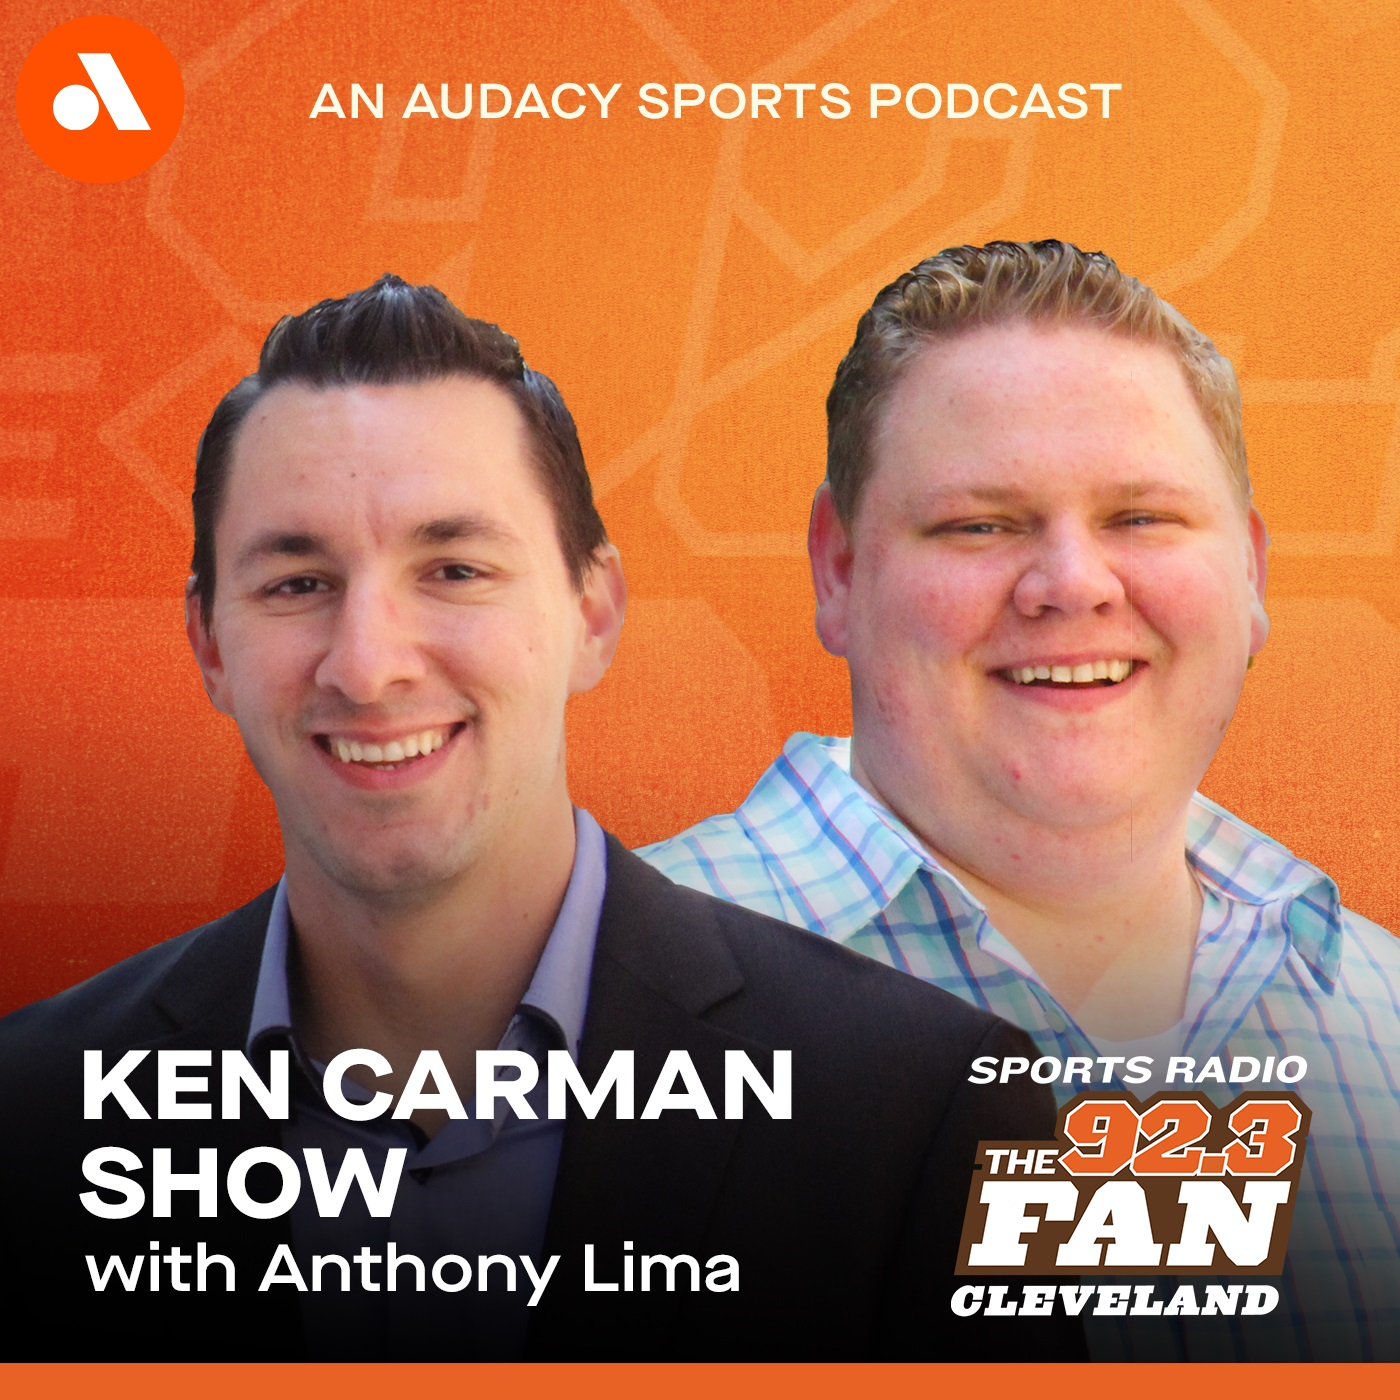 Hour 4: Ken too down on the Cavs? + Coach David Thorpe + Mitch, Please!